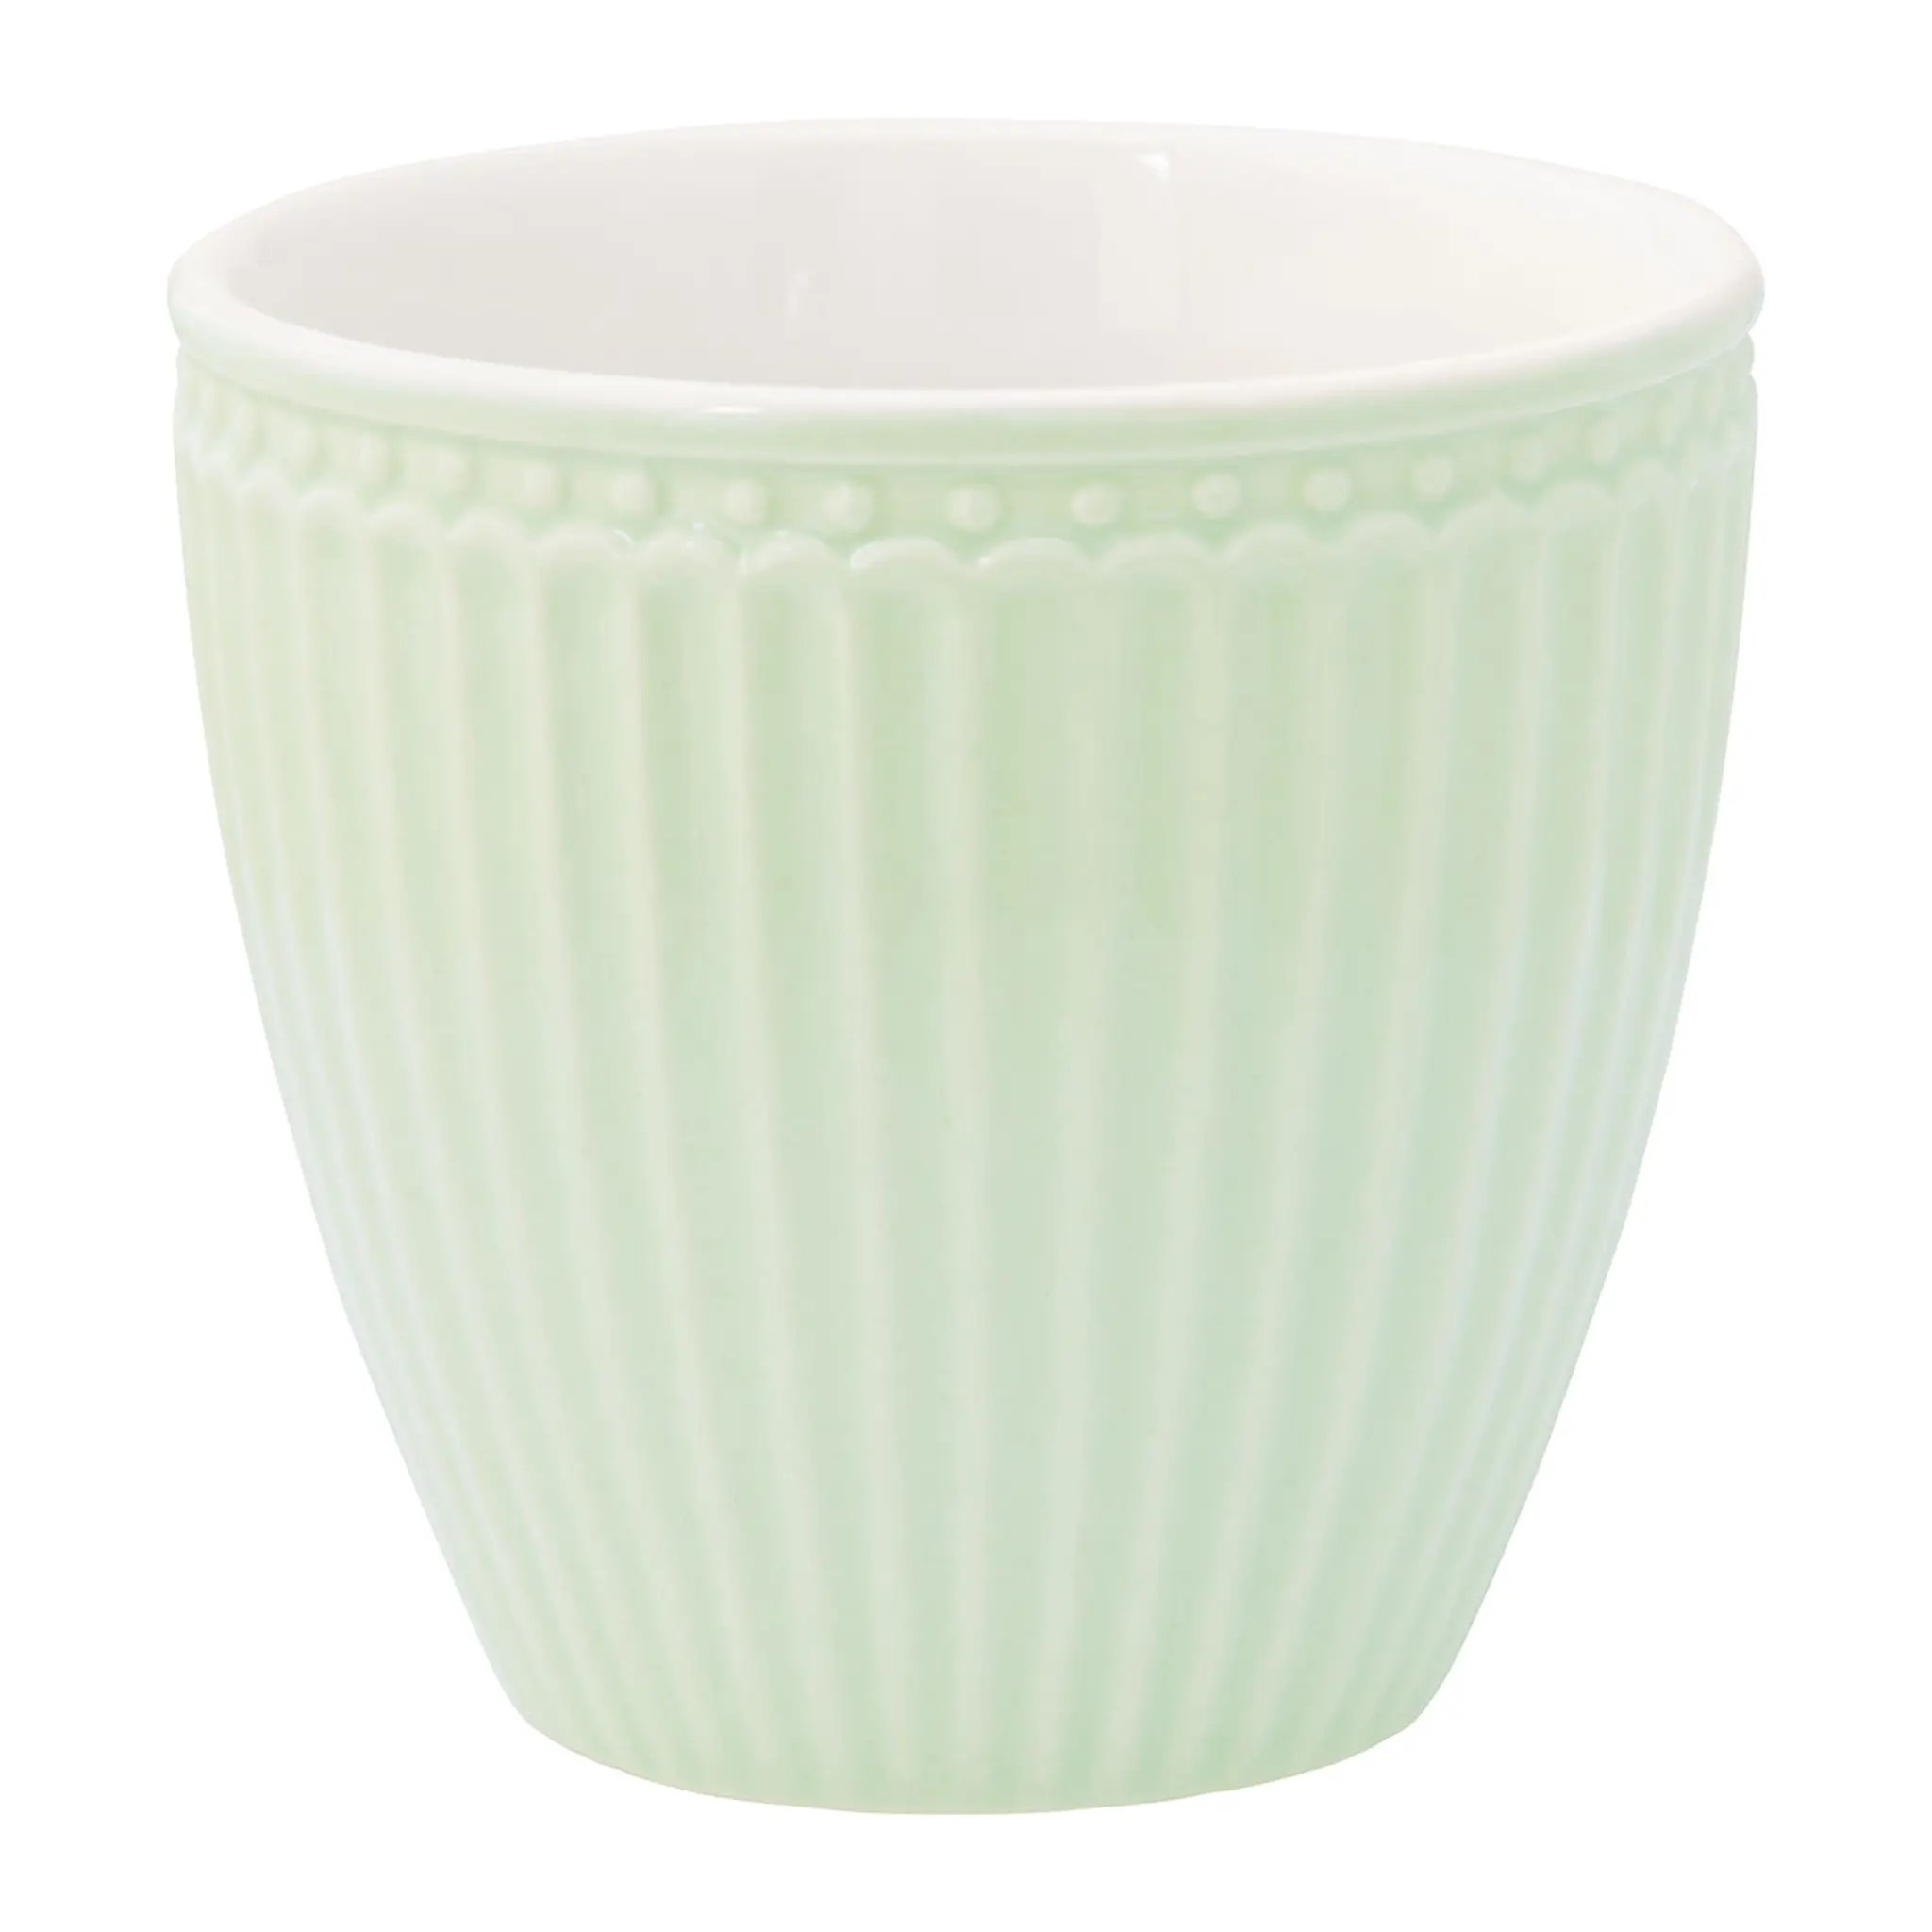 GreenGate Alice Lattemugg 35 cl Pale Green